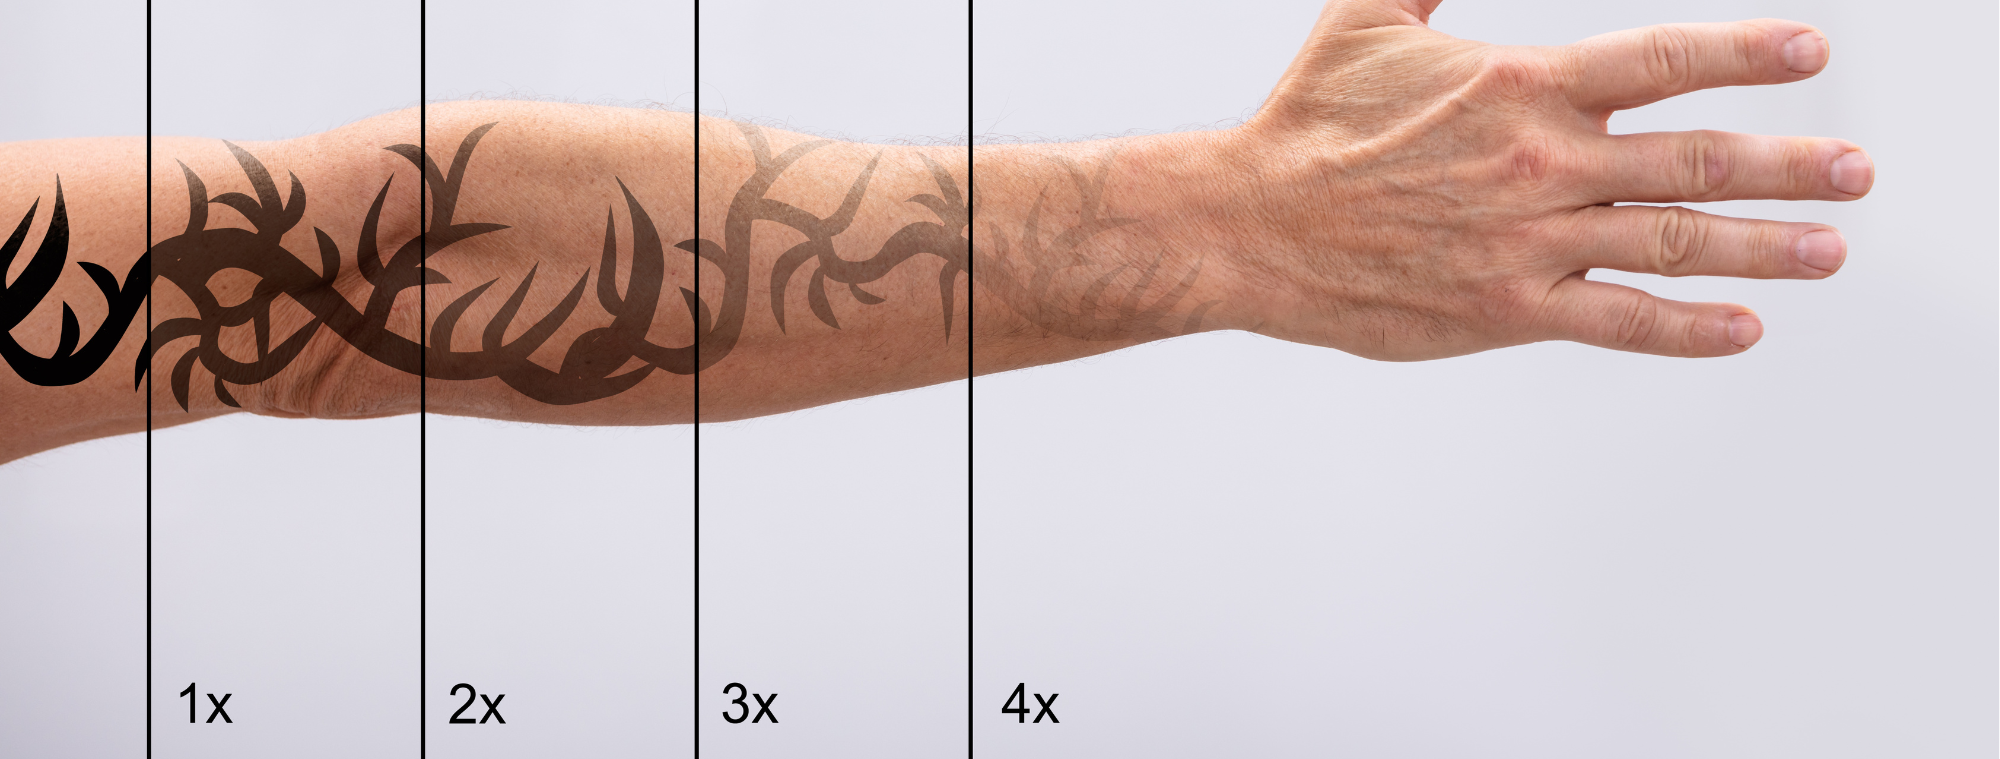 Best Tattoo Removal and Tattoo Removal Cost in Delhi - Desmoderm